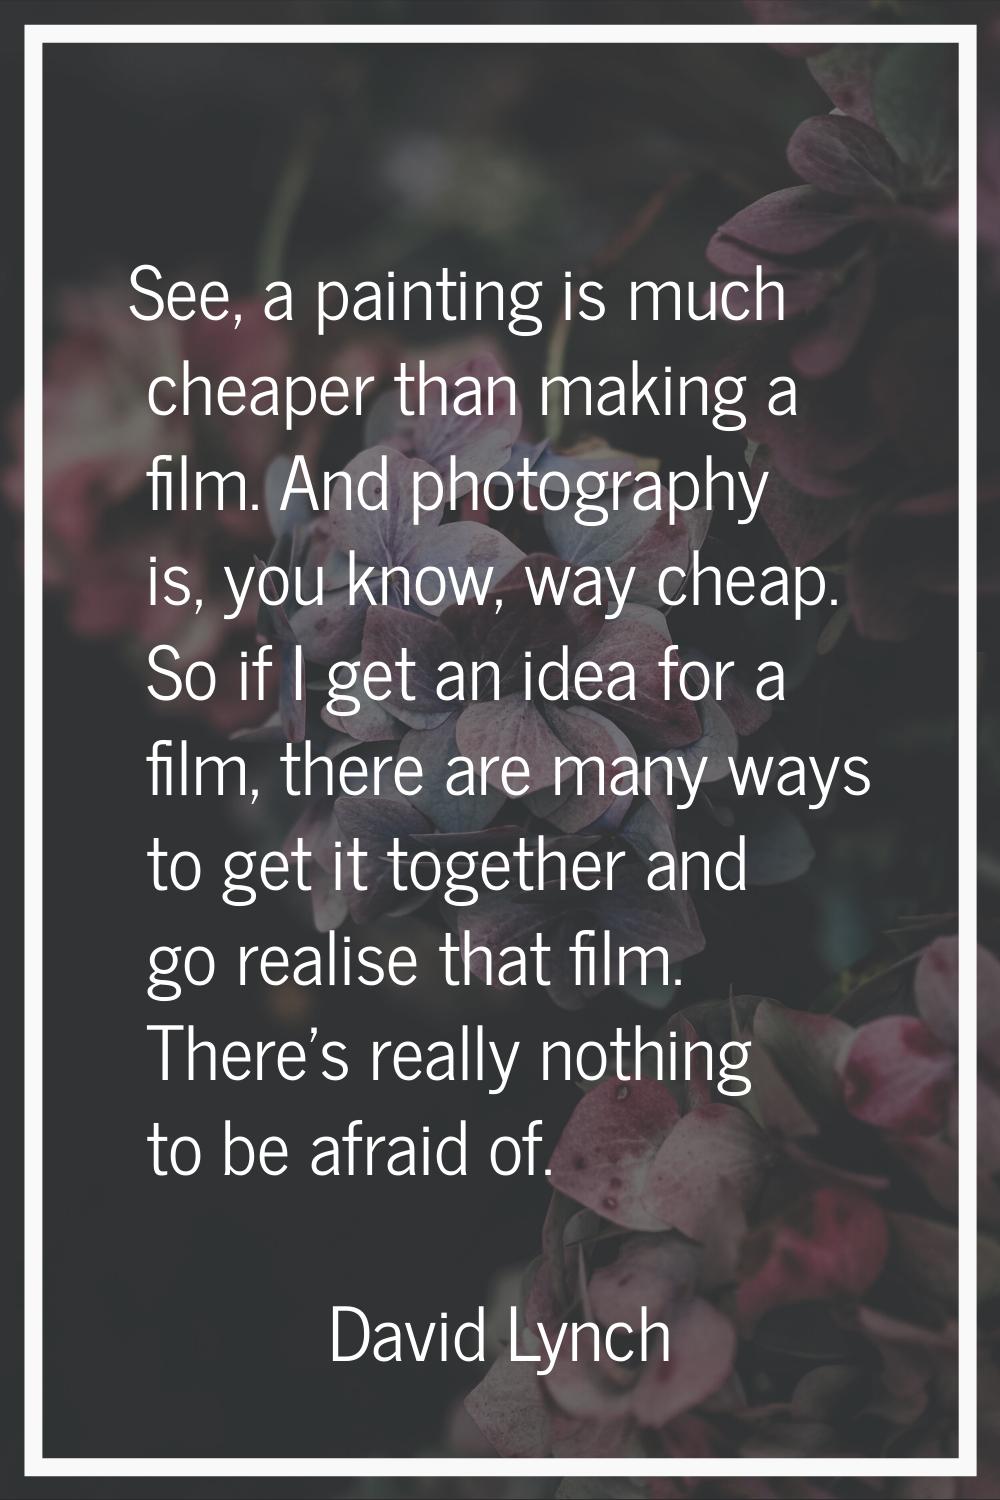 See, a painting is much cheaper than making a film. And photography is, you know, way cheap. So if 